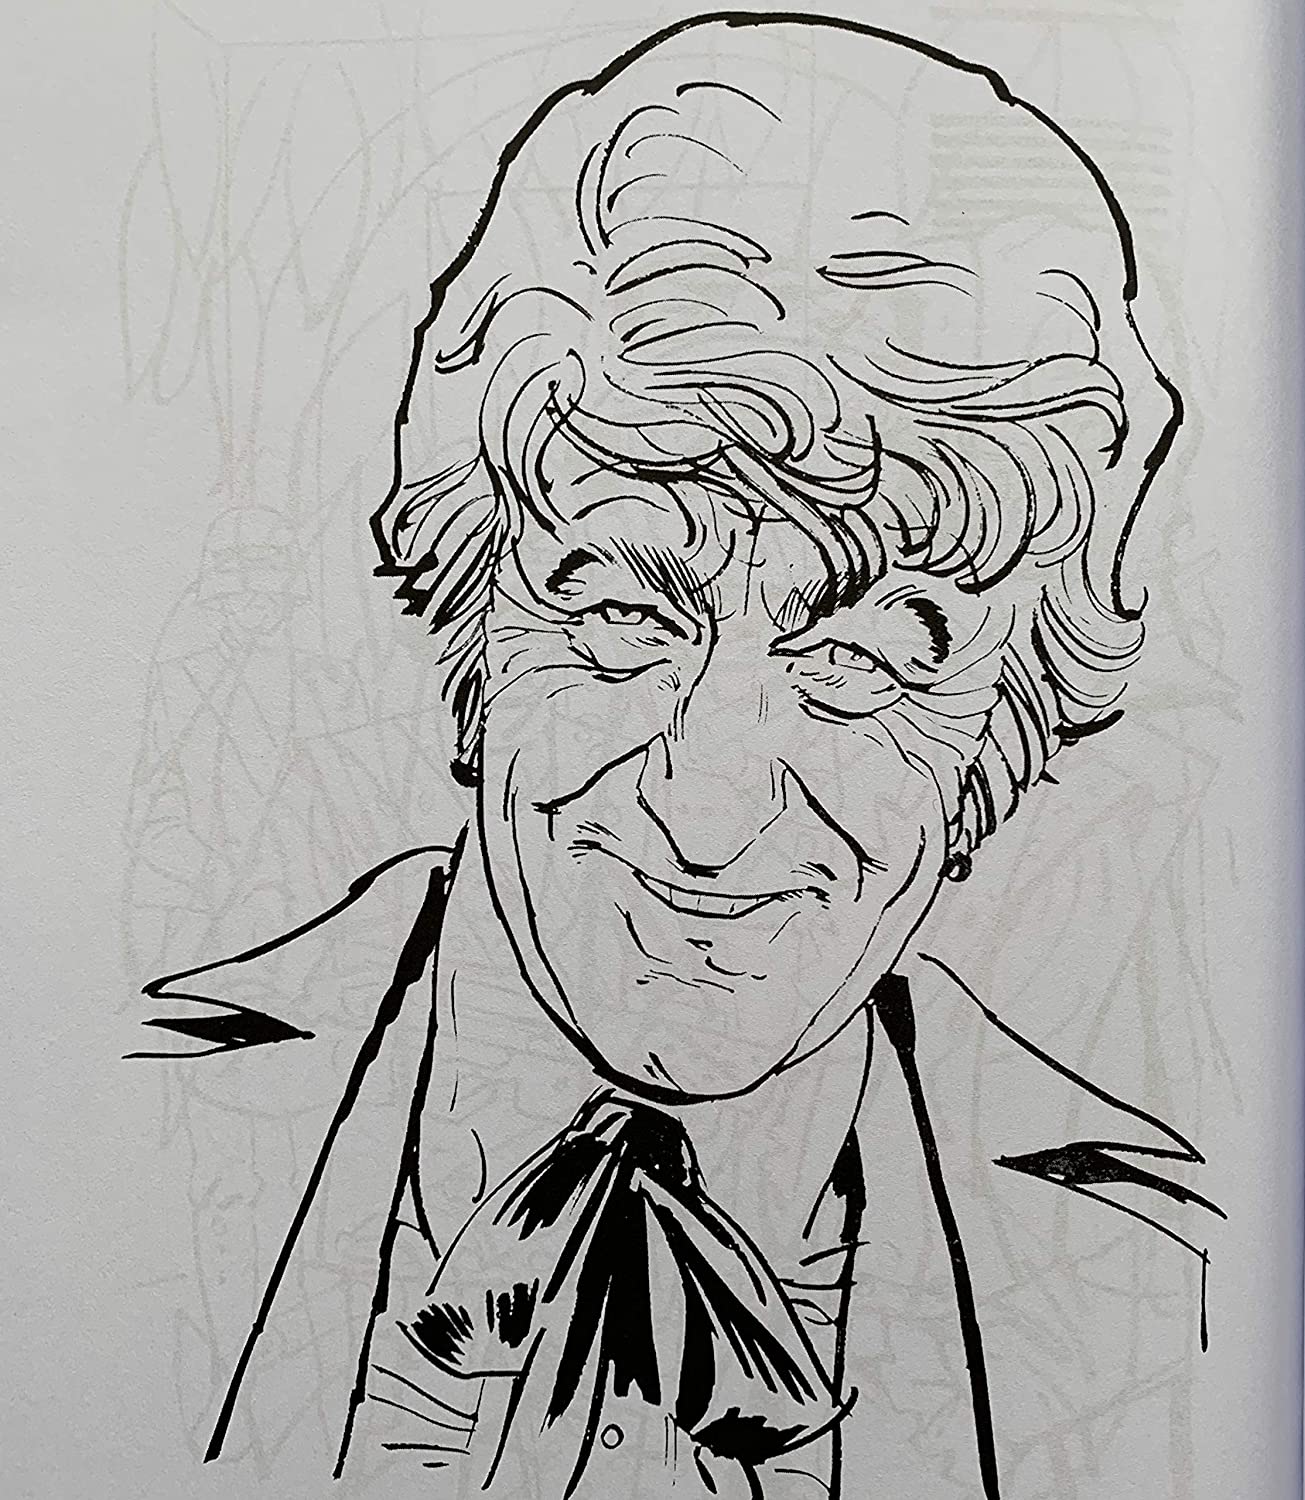 Vintage 1973 The Dr Who Colouring Book Staring Jon Pertwee As The Dr - Ultra Rare - Facsimile Edition 2013